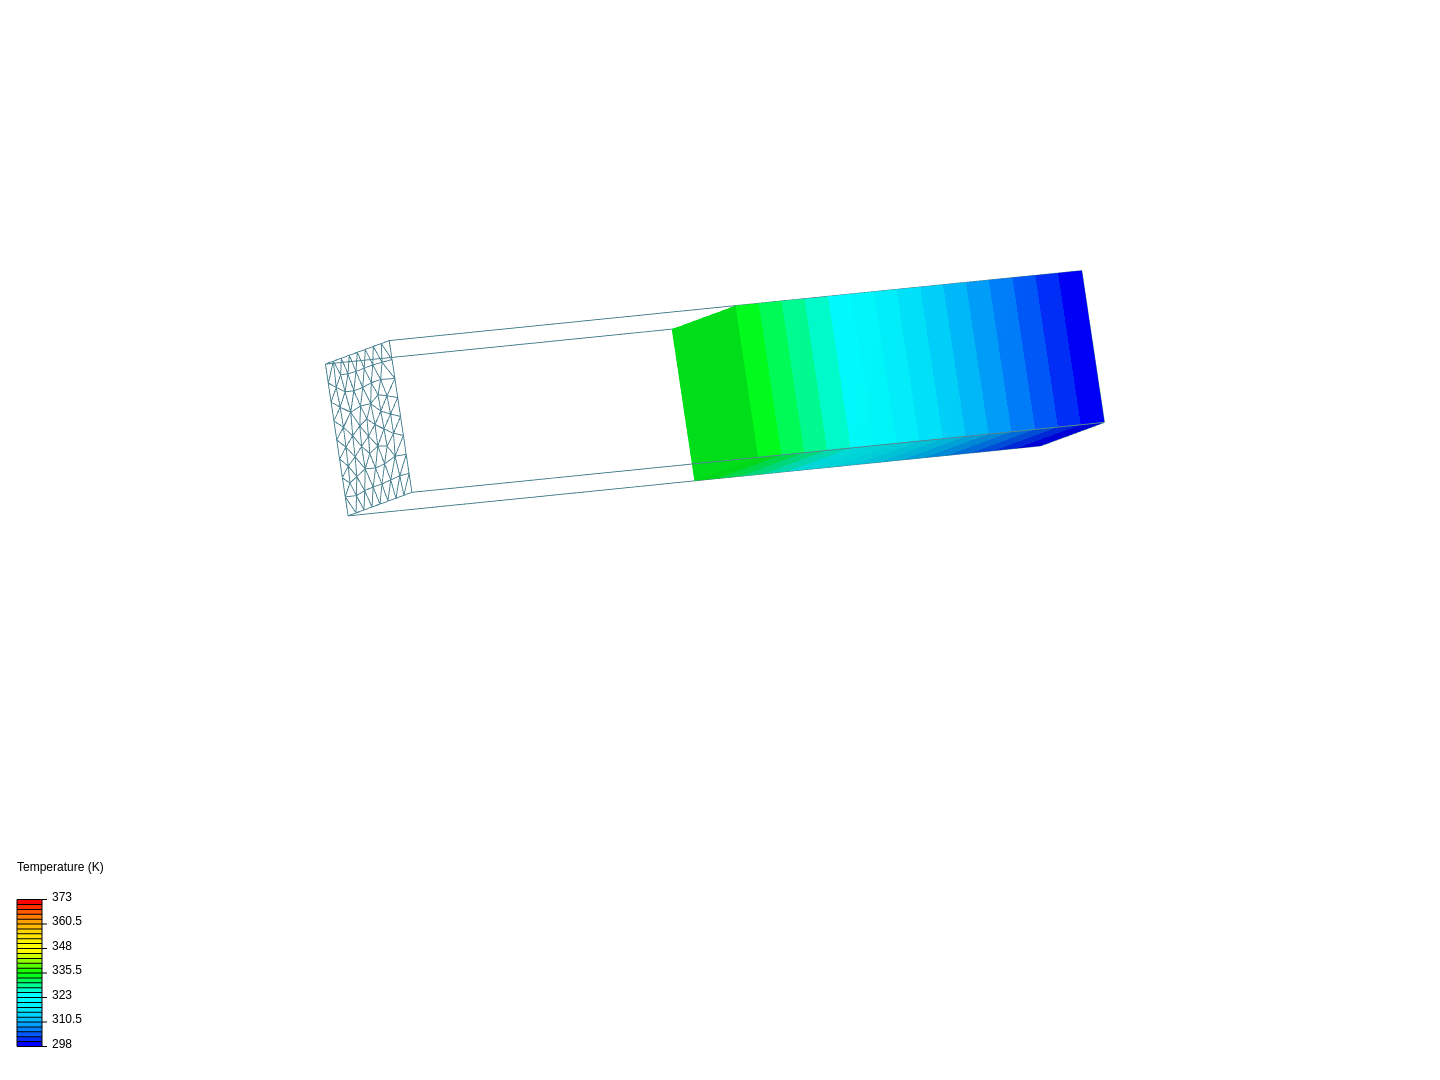 Heat transfer in a beam image